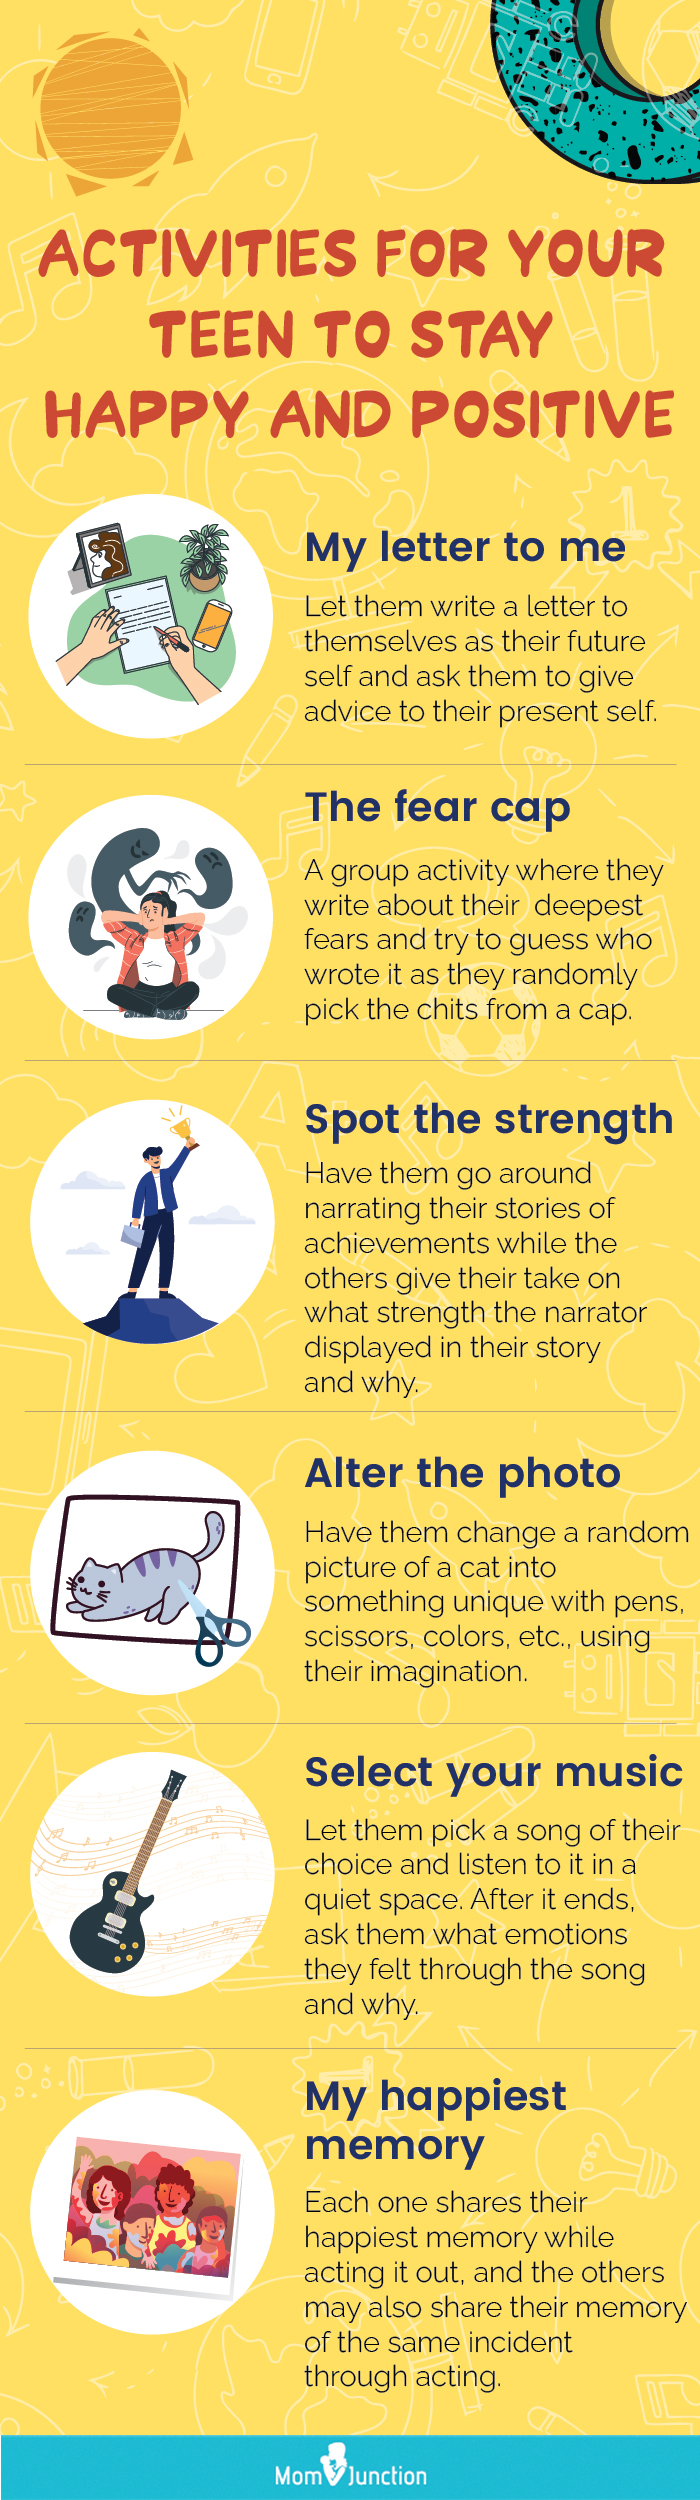 therapy activities for teenagers [infographic]